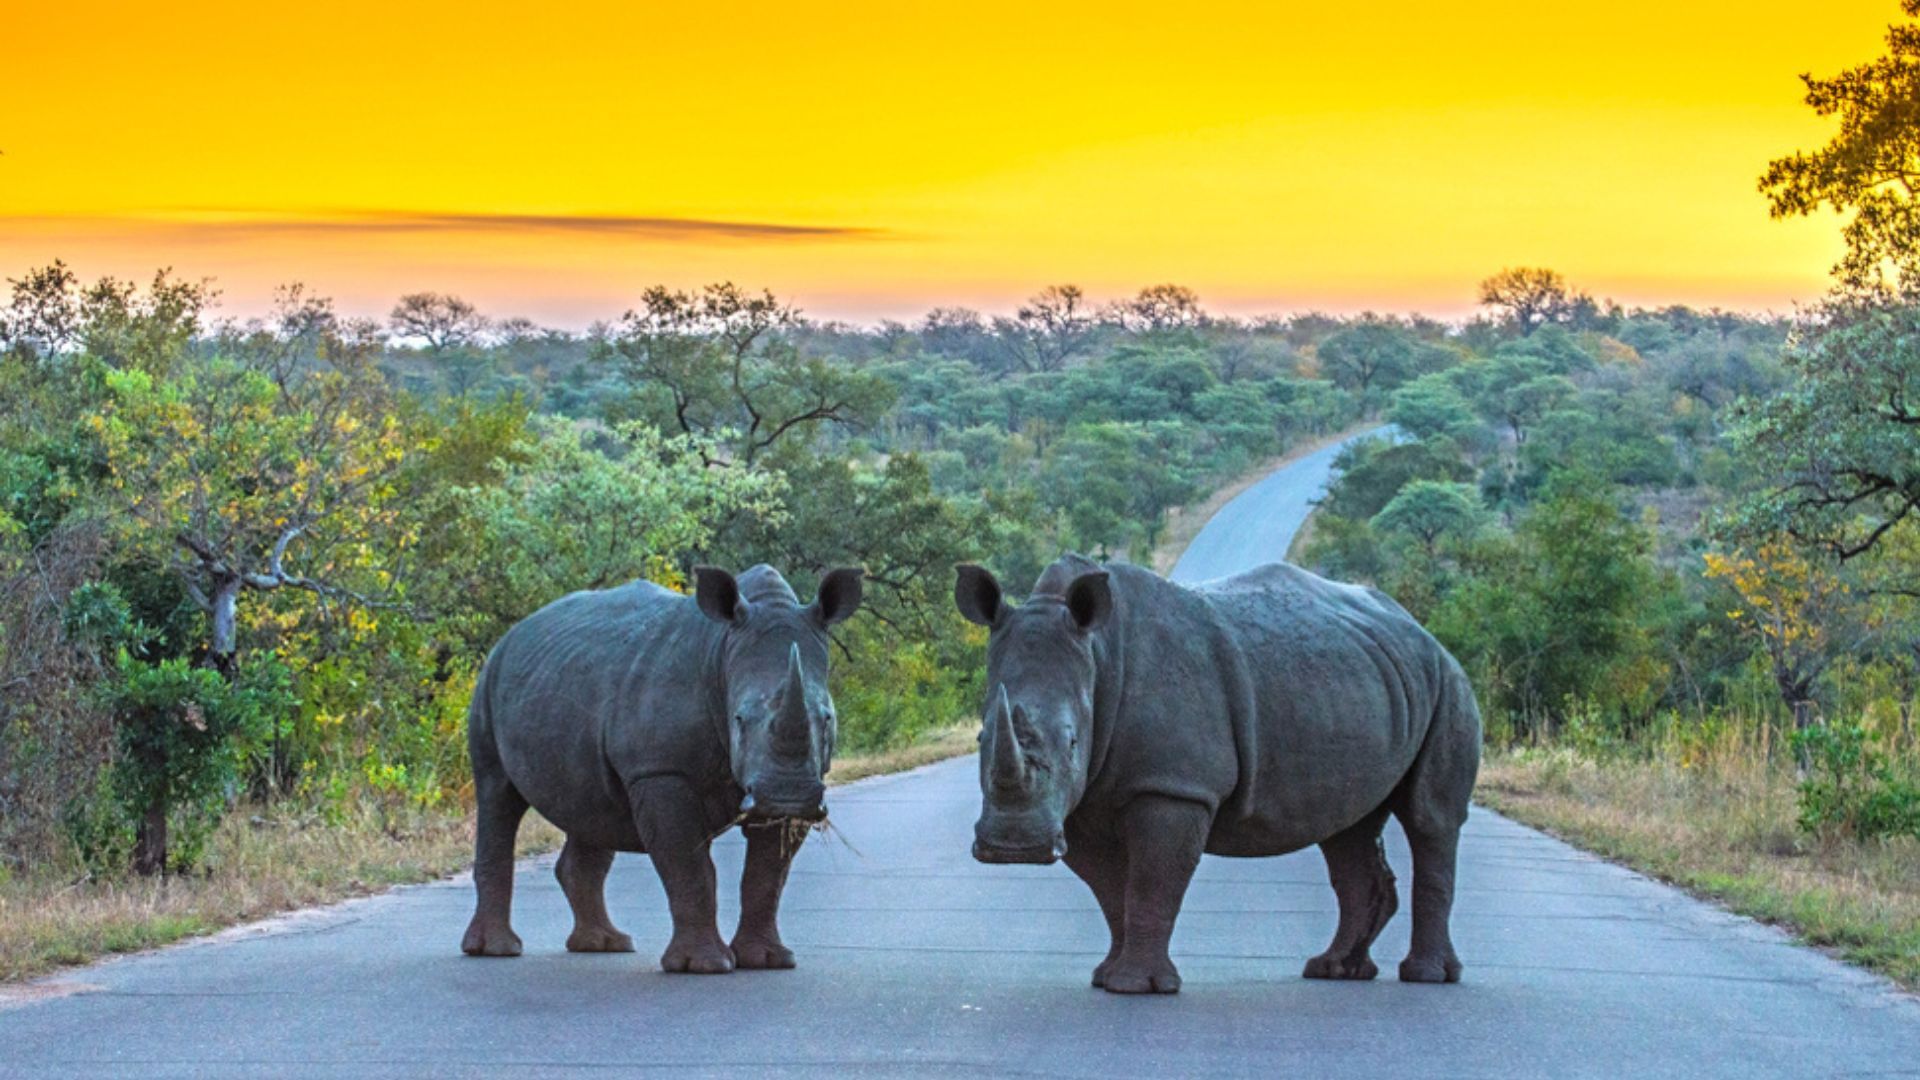 Best Times to Visit South Africa, According to Locals